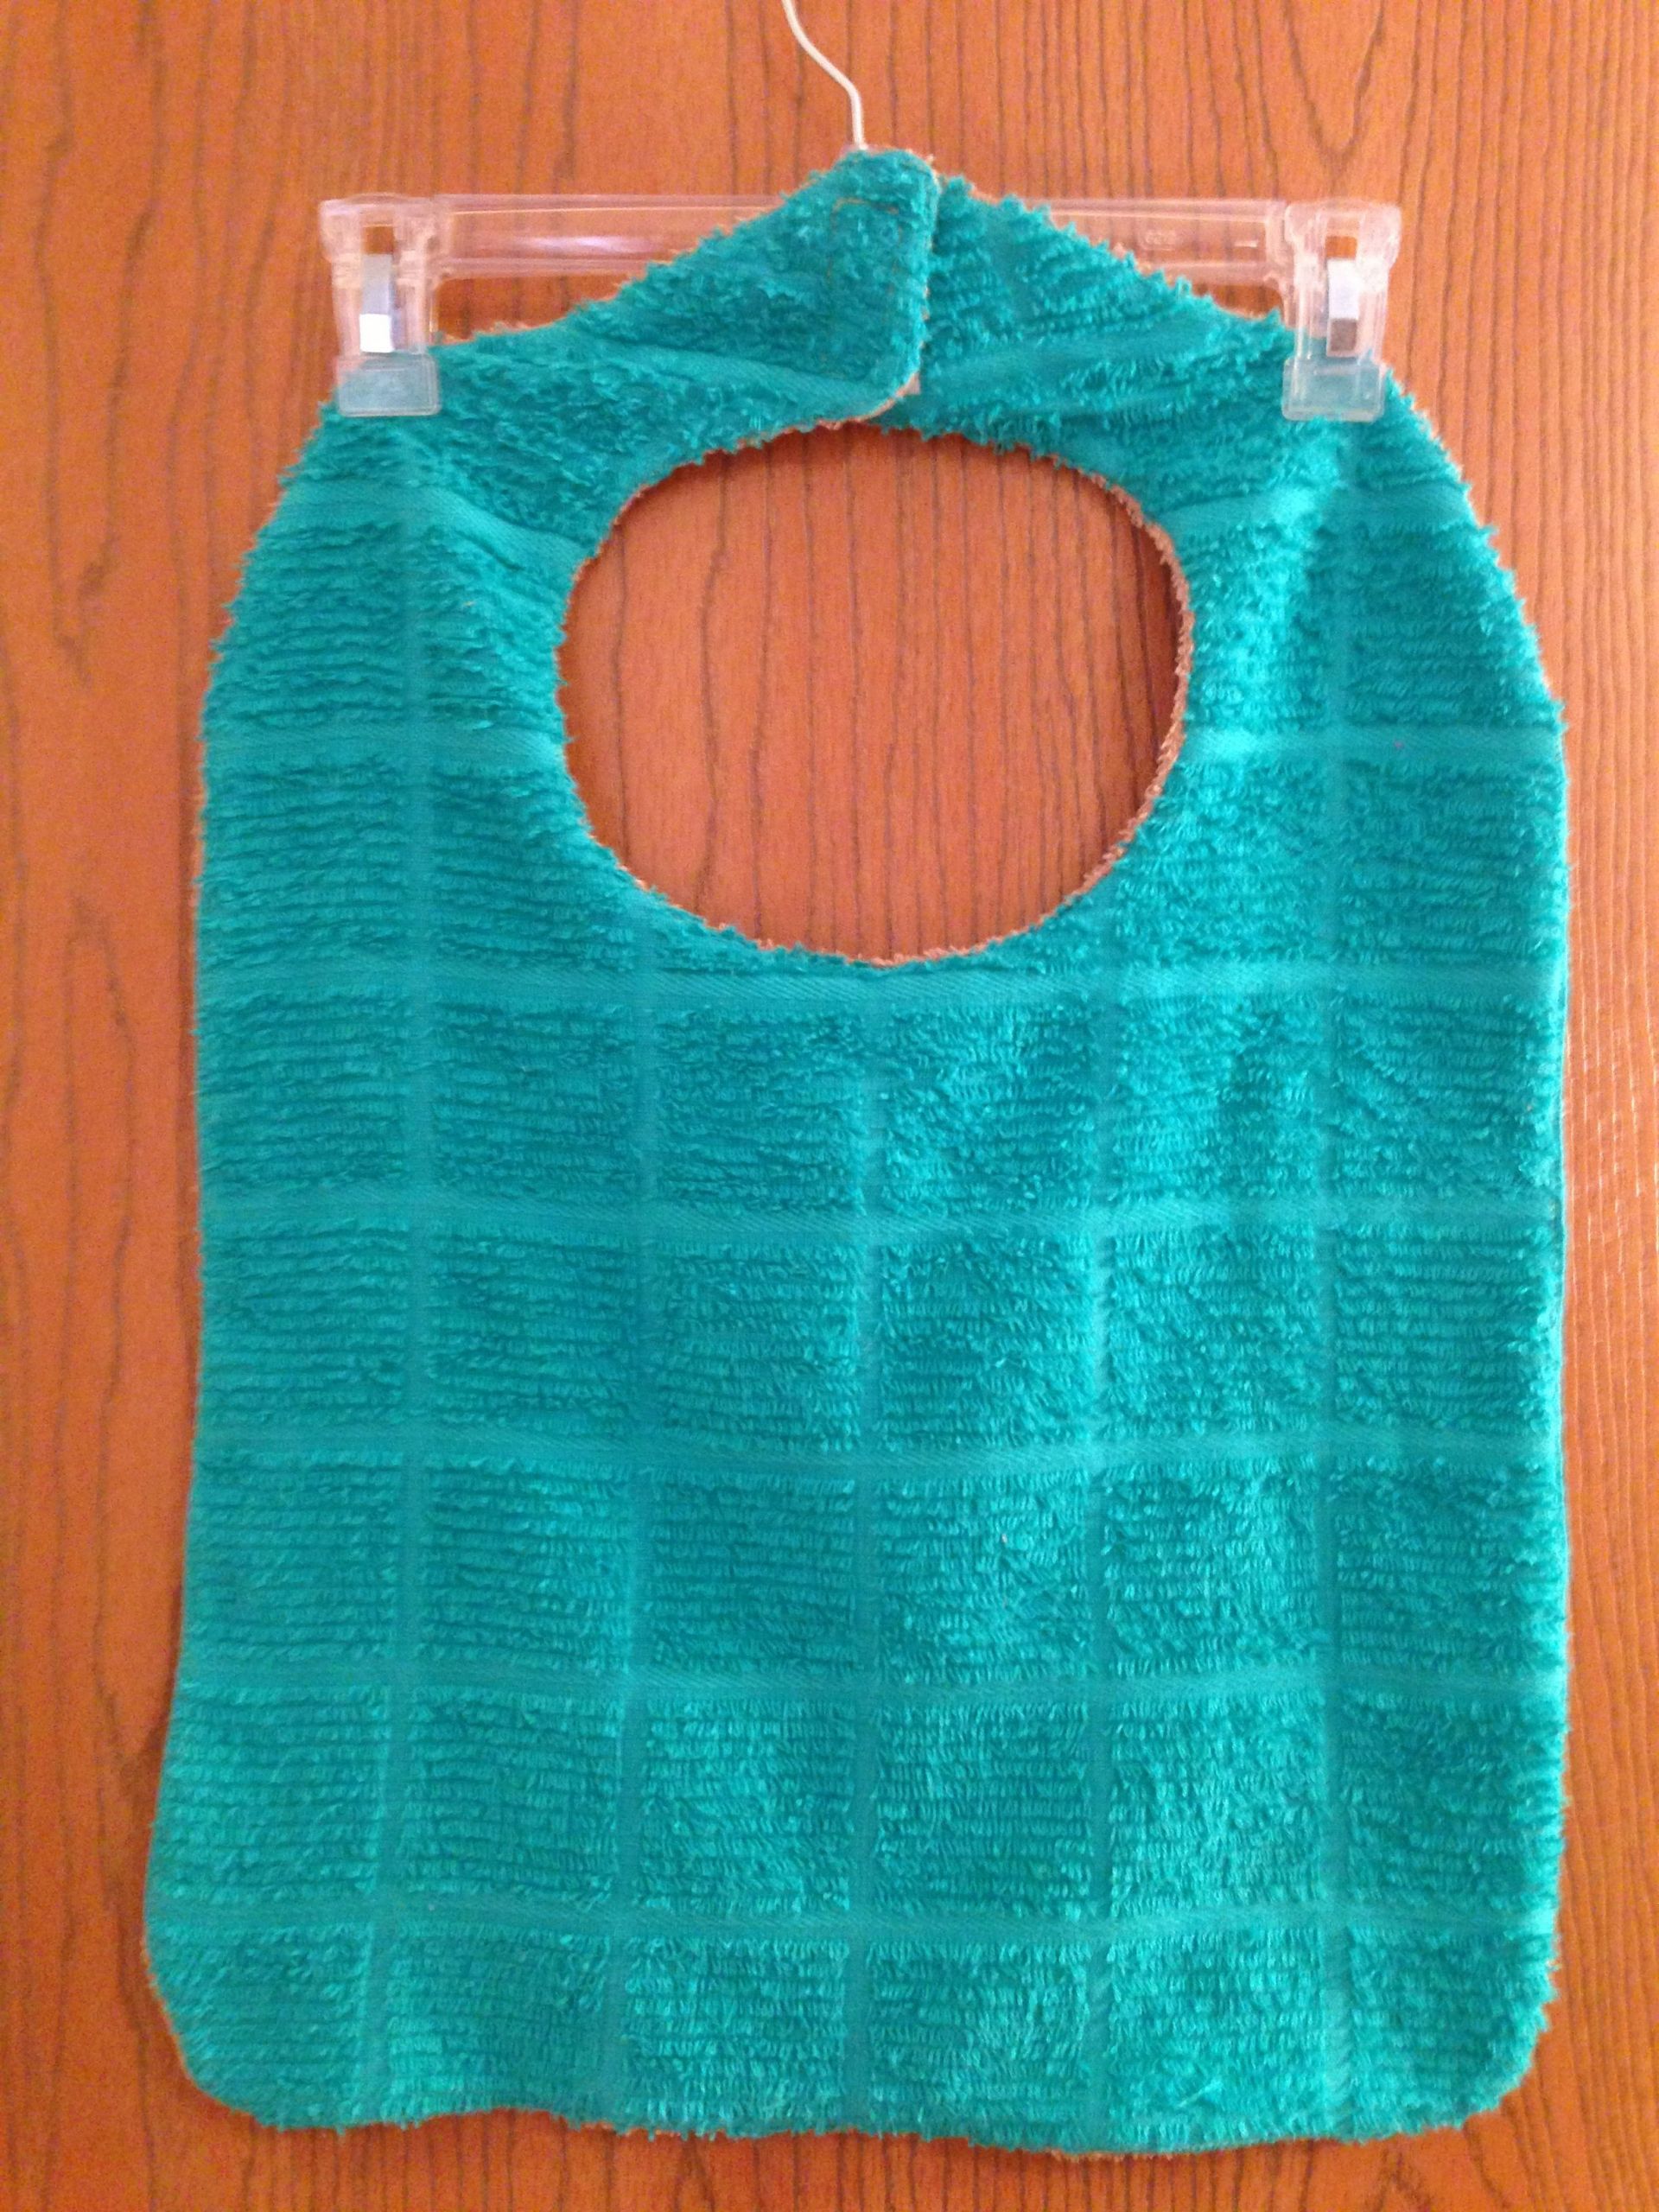 DIY Adult Bibs
 Adult clothing protector I made from a hand towel